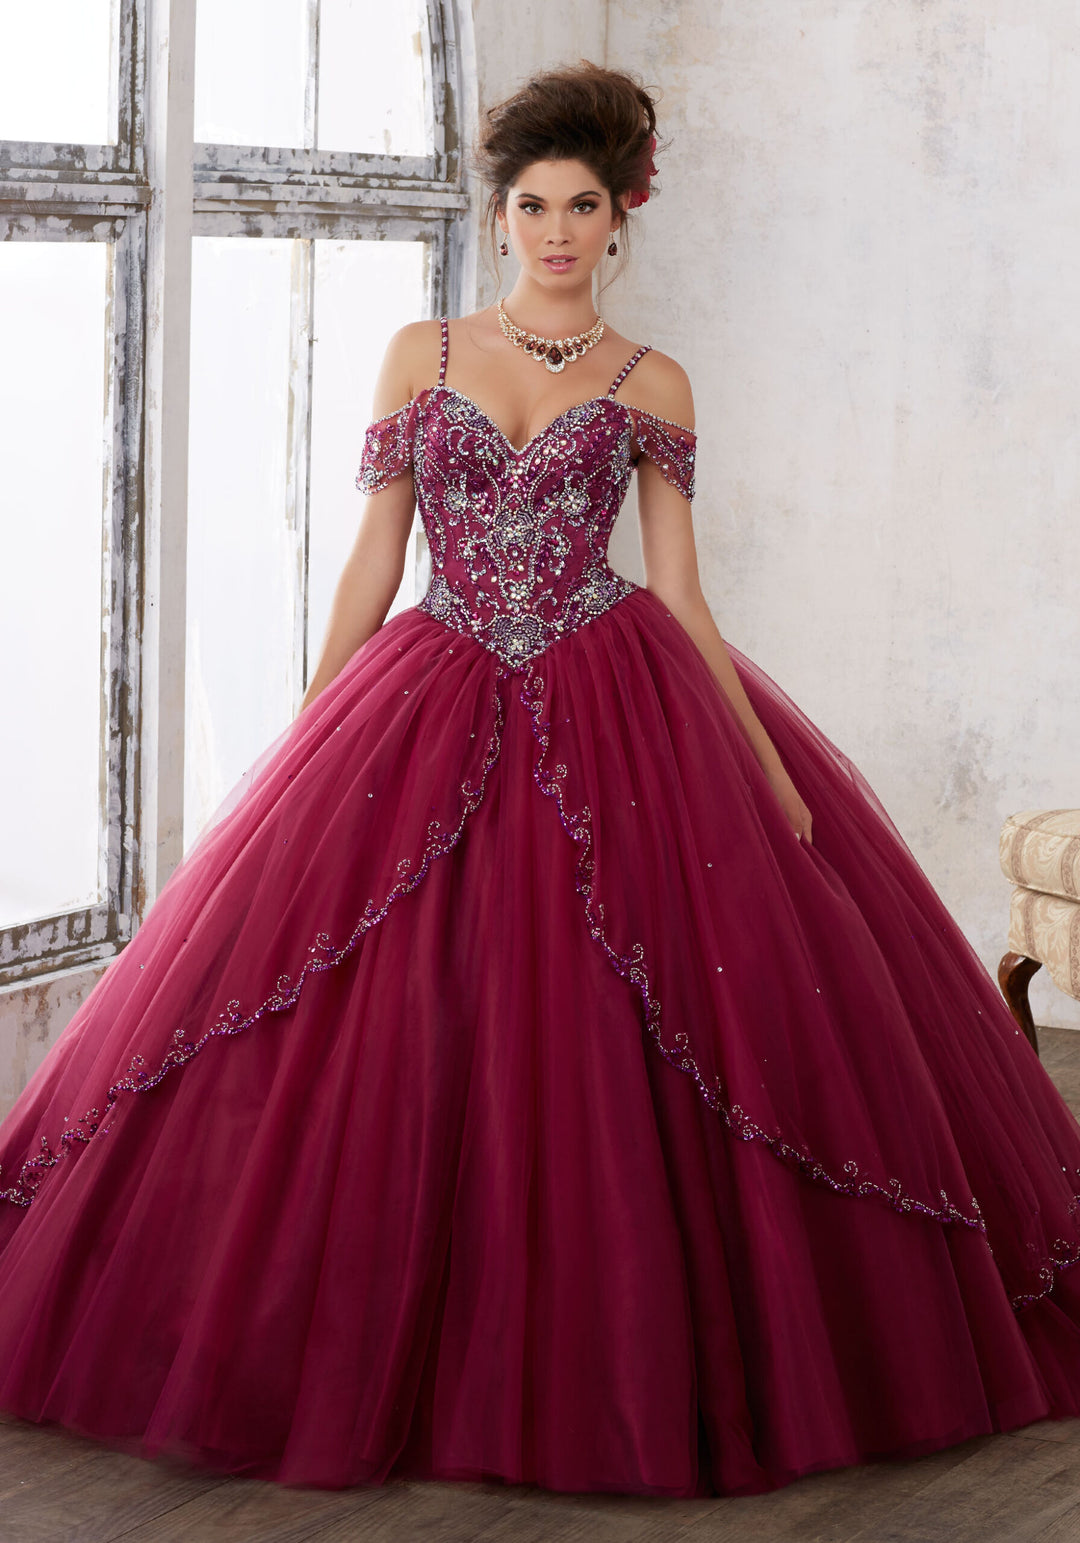 Vizcaya by Morilee #89135 Jewel Beading on Tulle Ball Gown